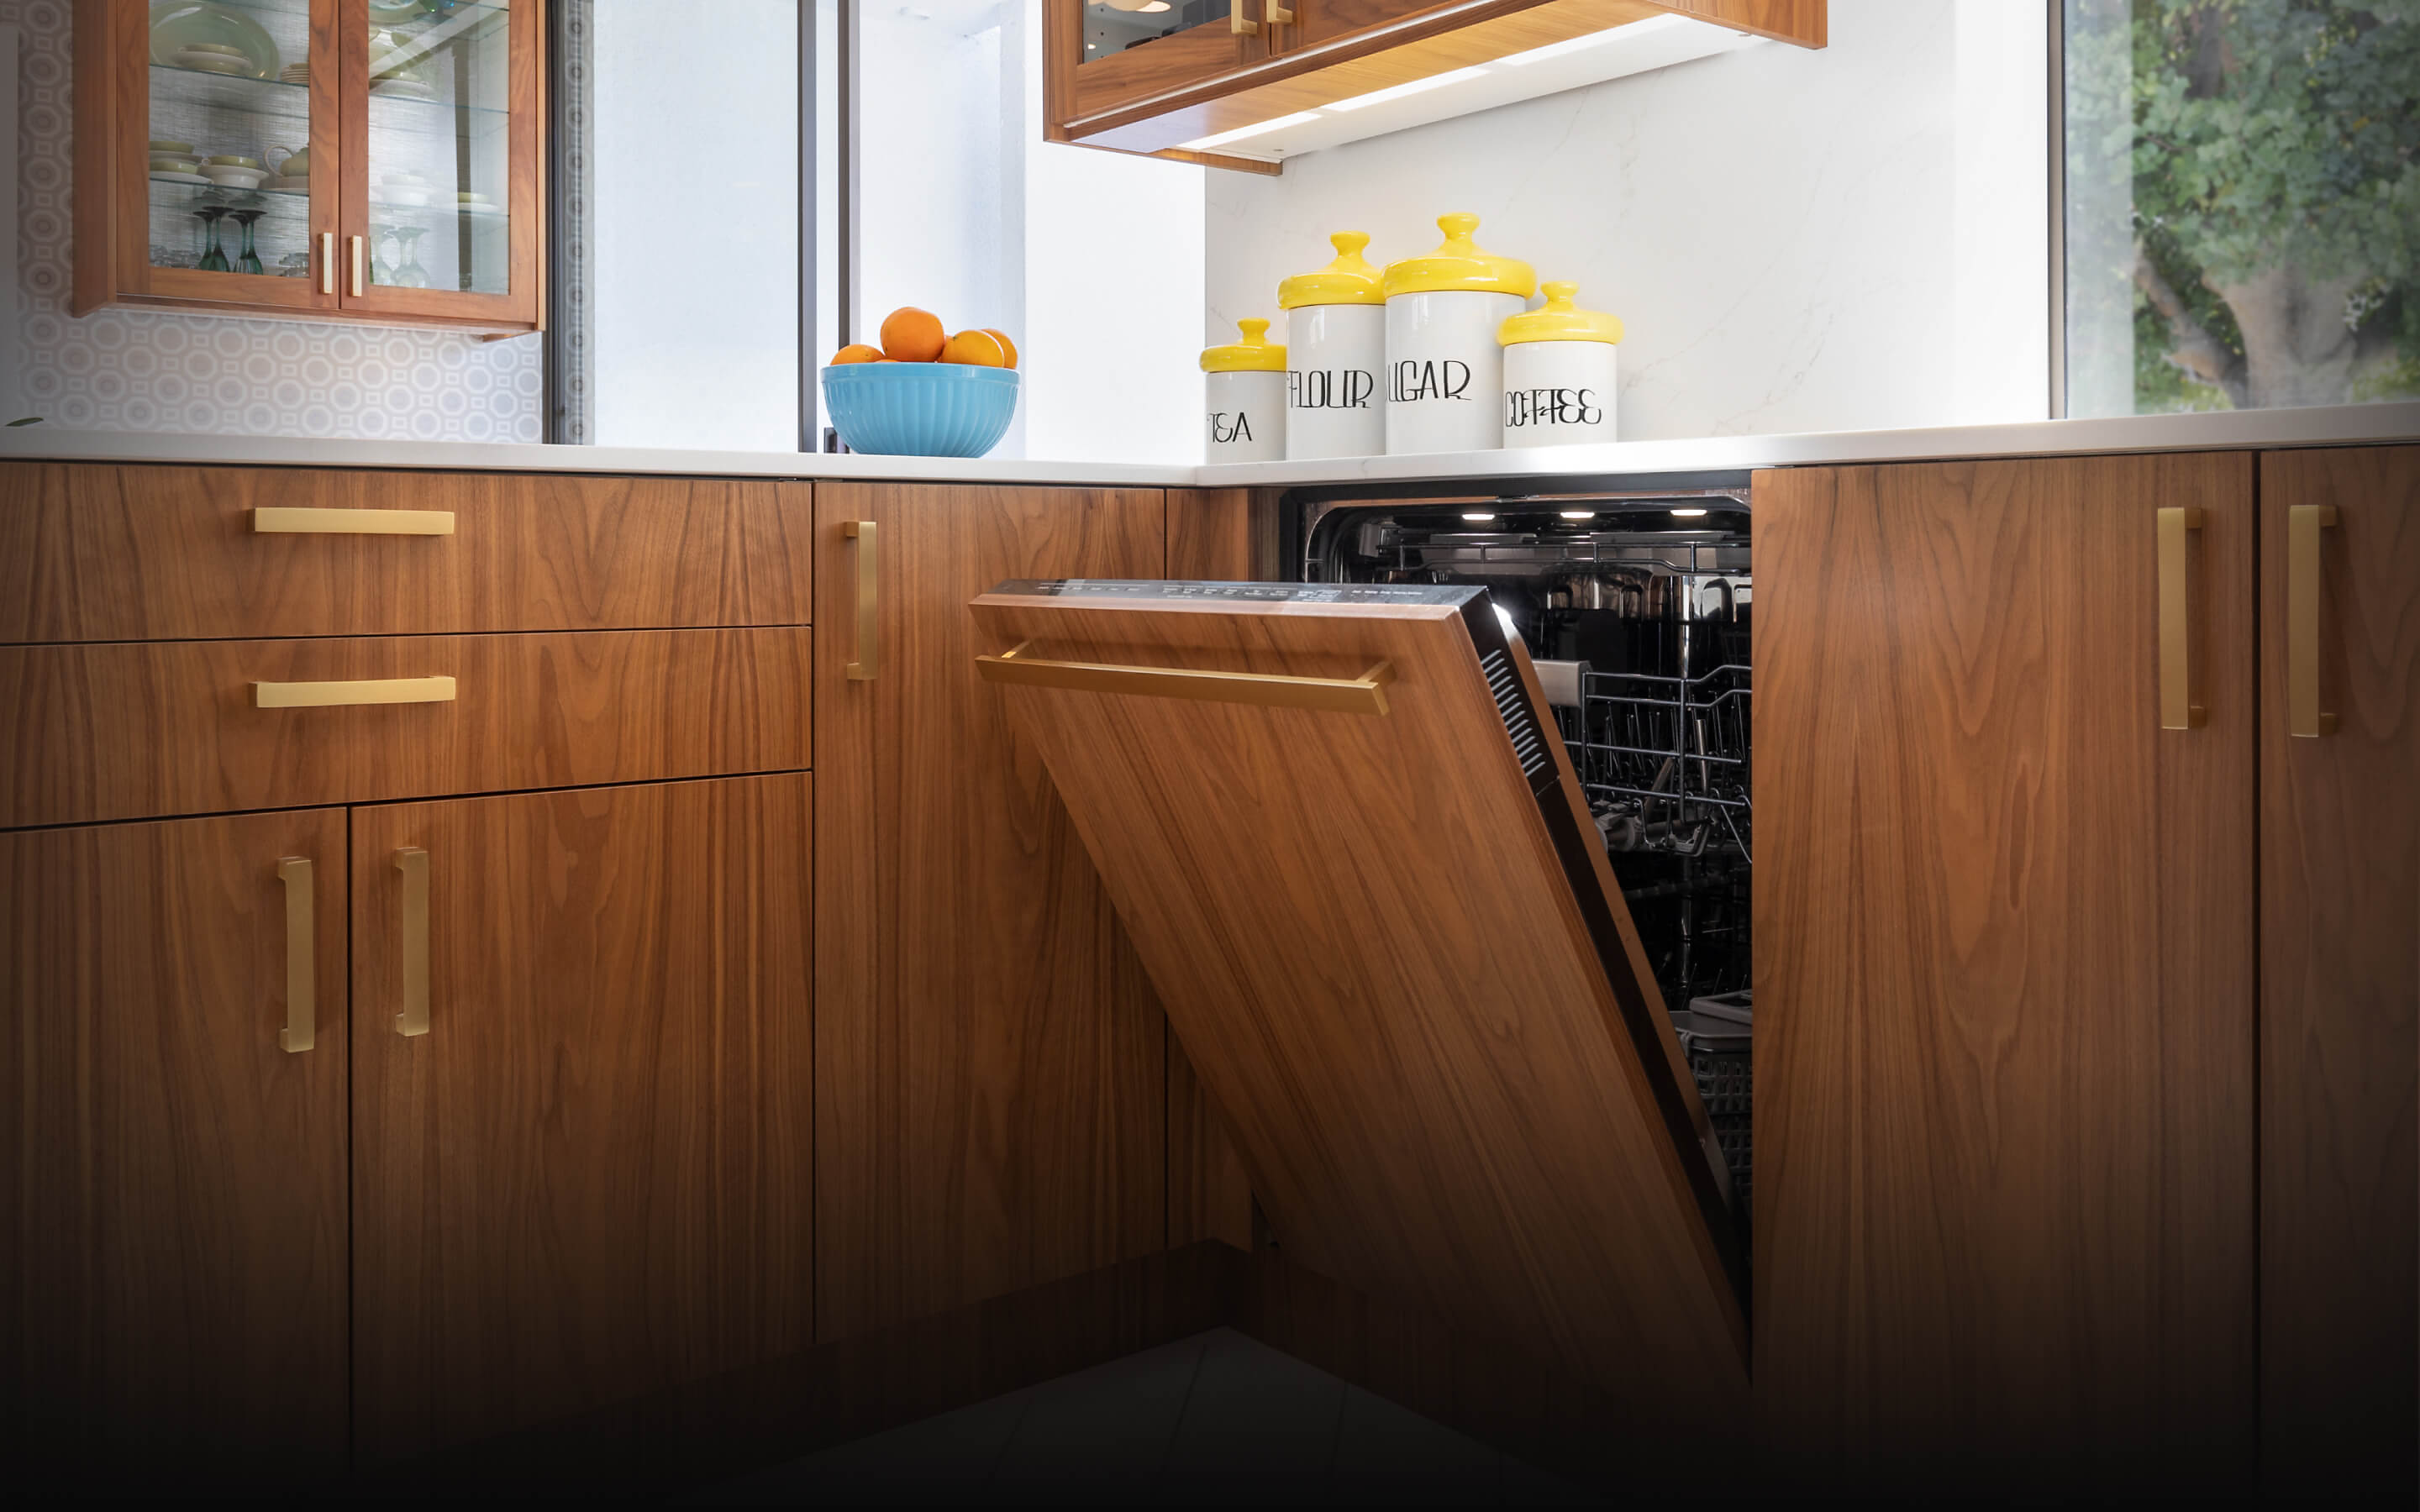 A JennAir® Panel-Ready Dishwasher in a kitchen with retro wooden cabinets.